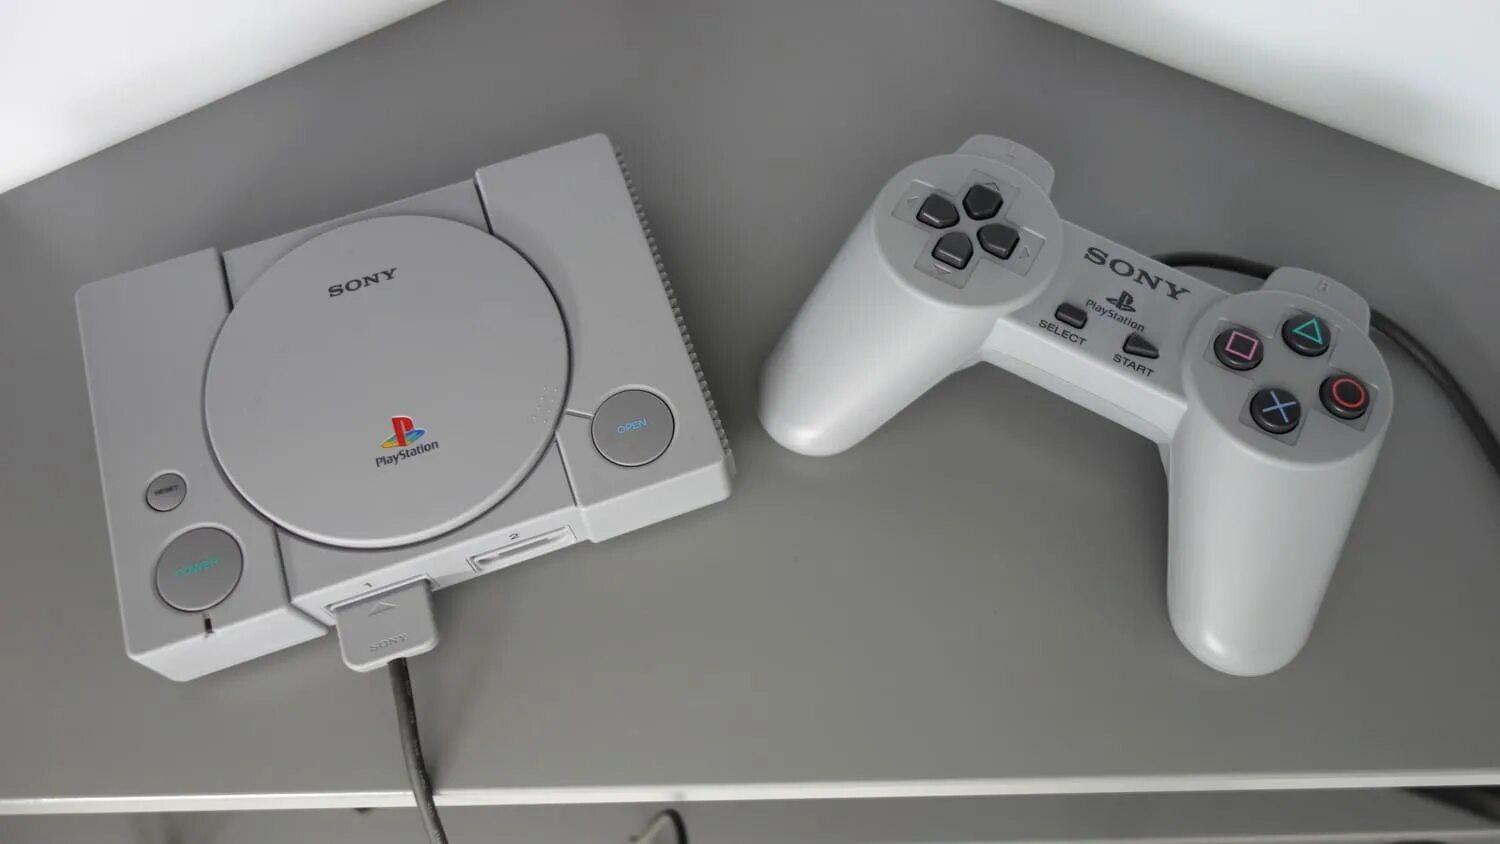 Sony PLAYSTATION ps1. Sony ps1 Classic. Sony PLAYSTATION | ps1 Classic. Сони плейстейшен 8. Sony playstation ремонтundefined